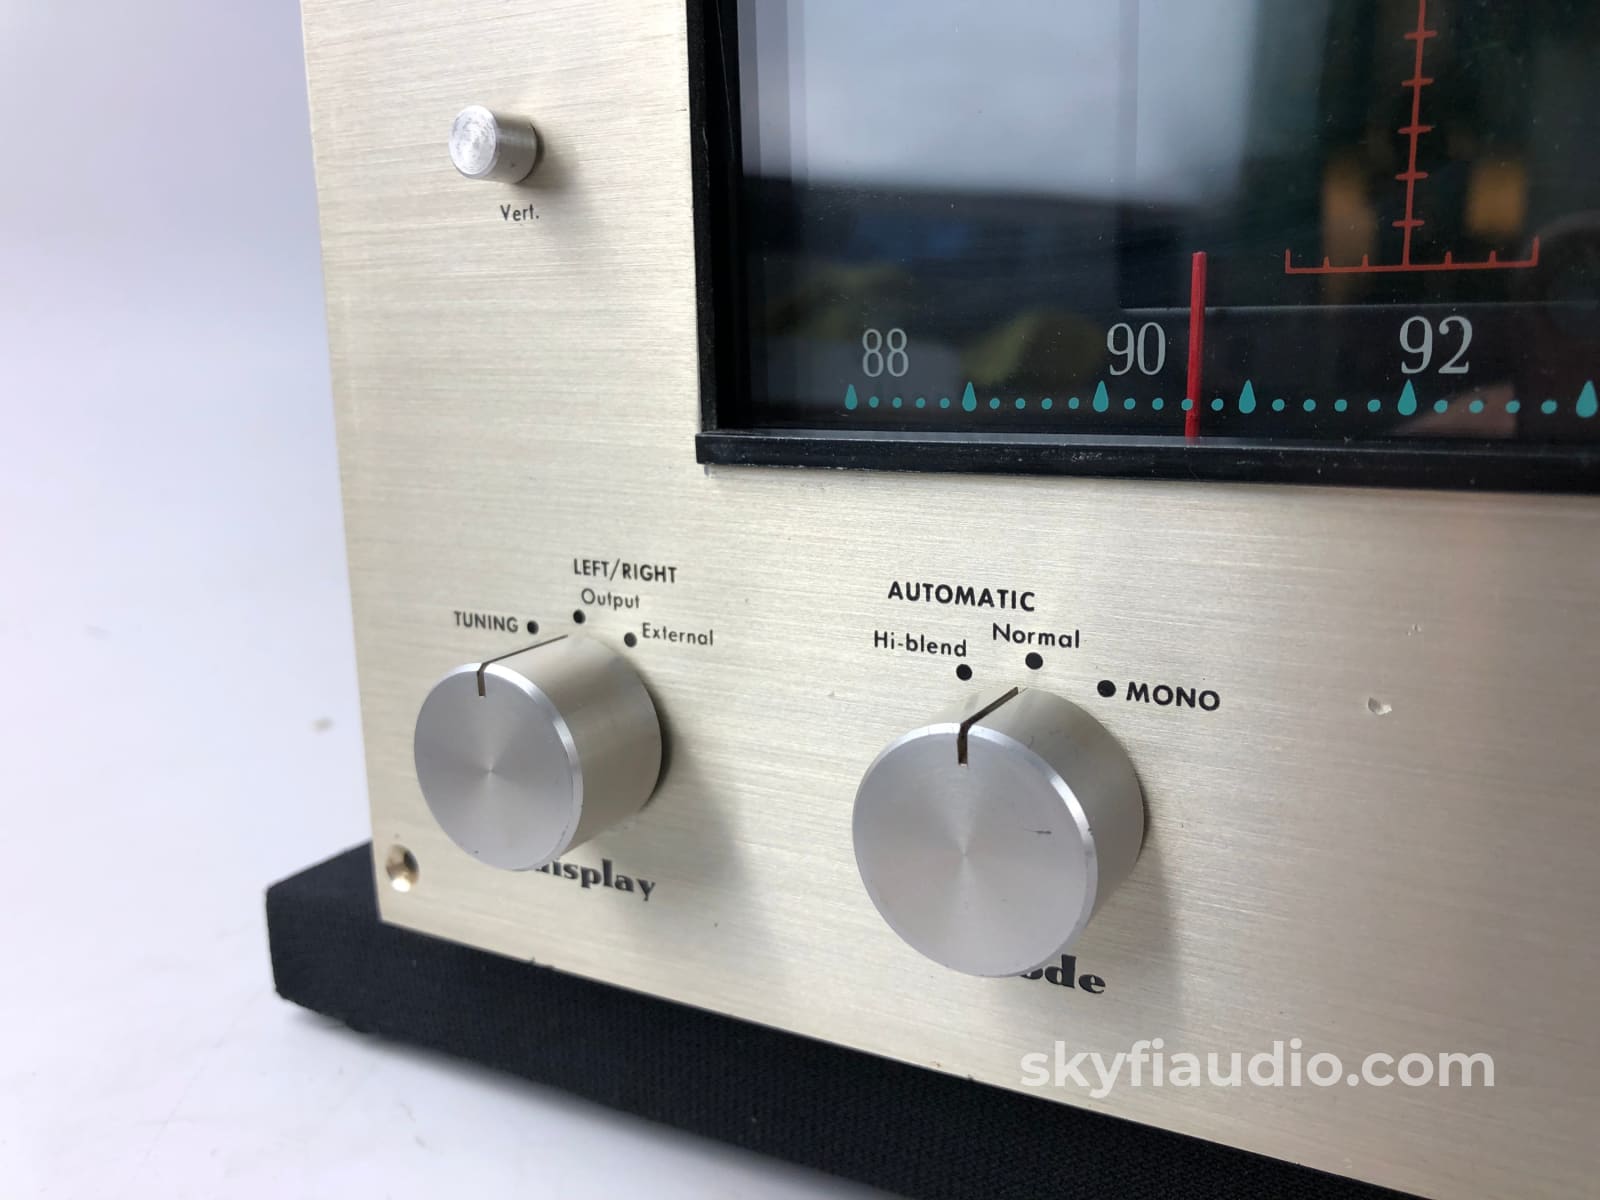 Marantz 10B Vintage Analog Tube Tuner - Top 3 Tuners Ever Made Highly Collectable See Video